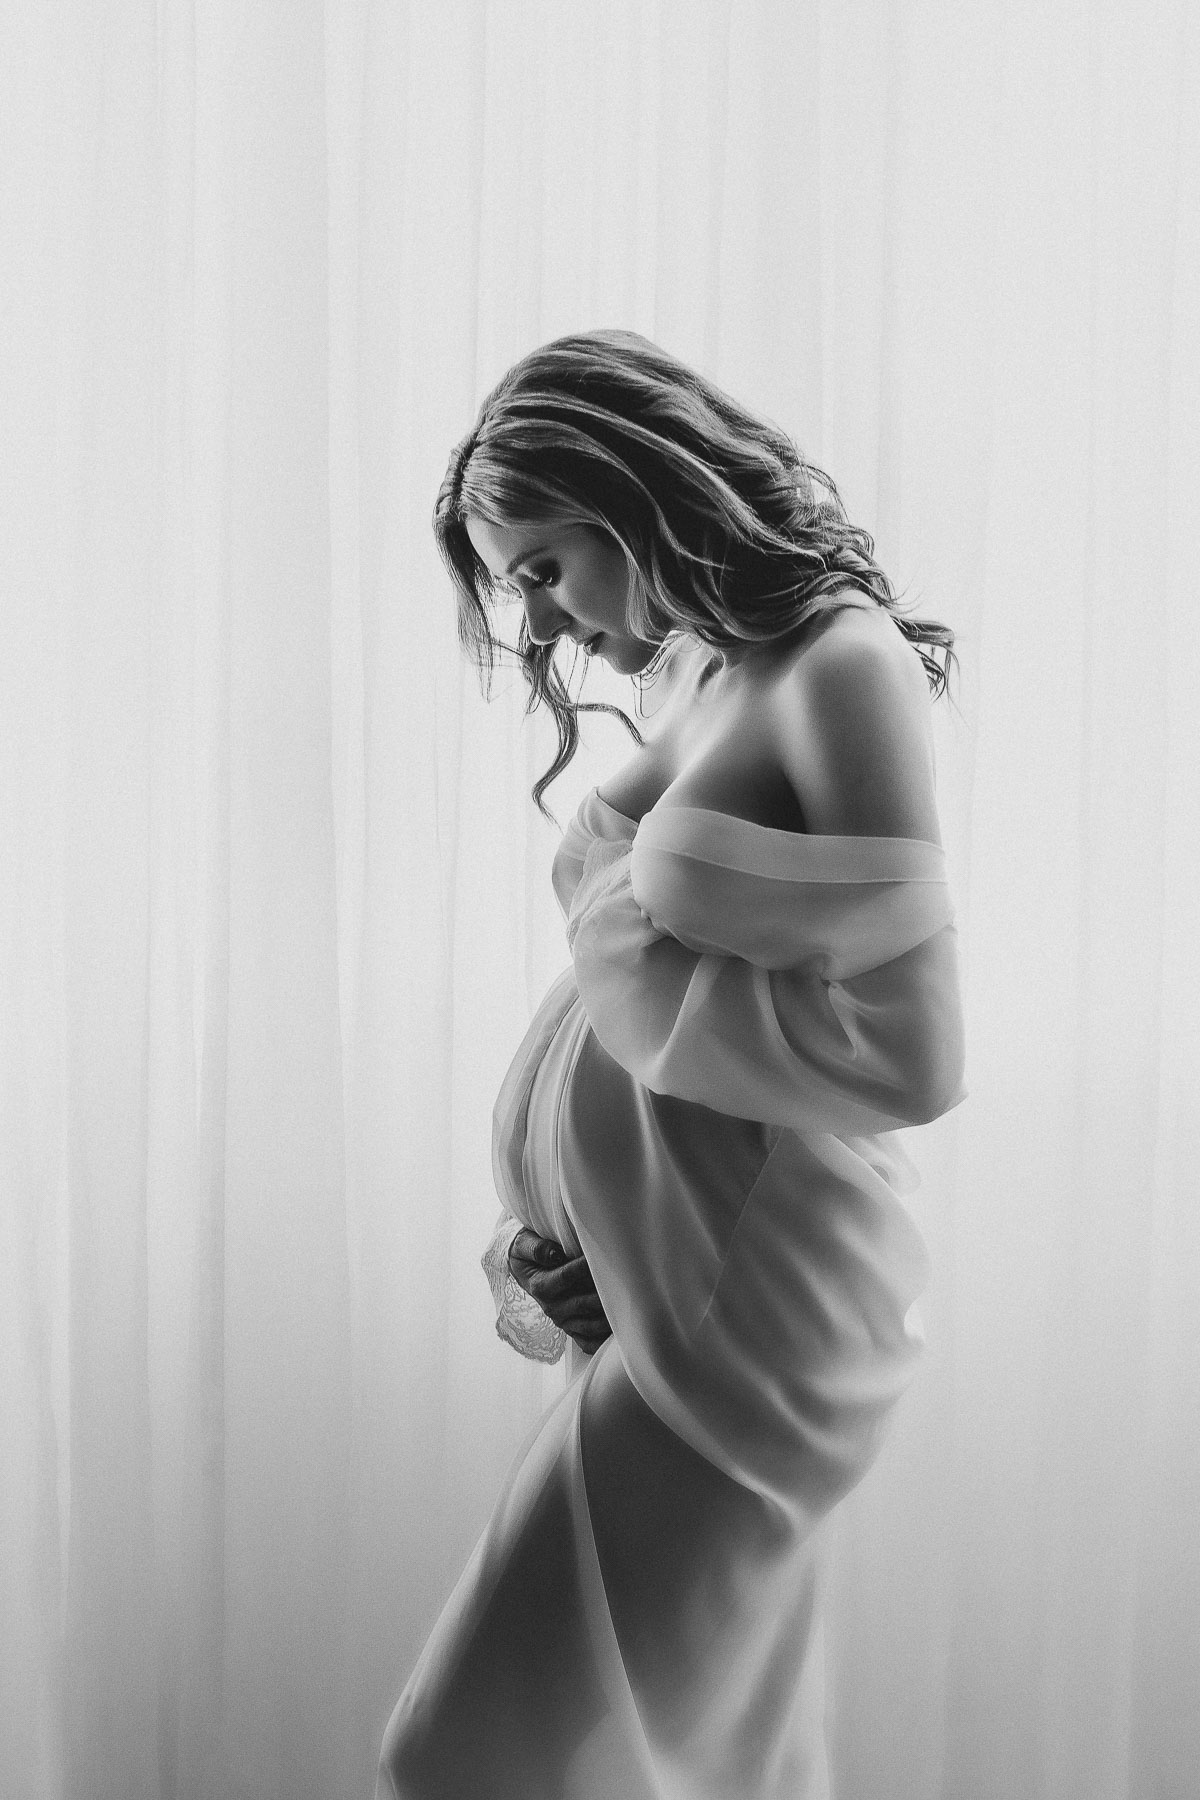 black and white sheer robe in artistic maternity photoshoot